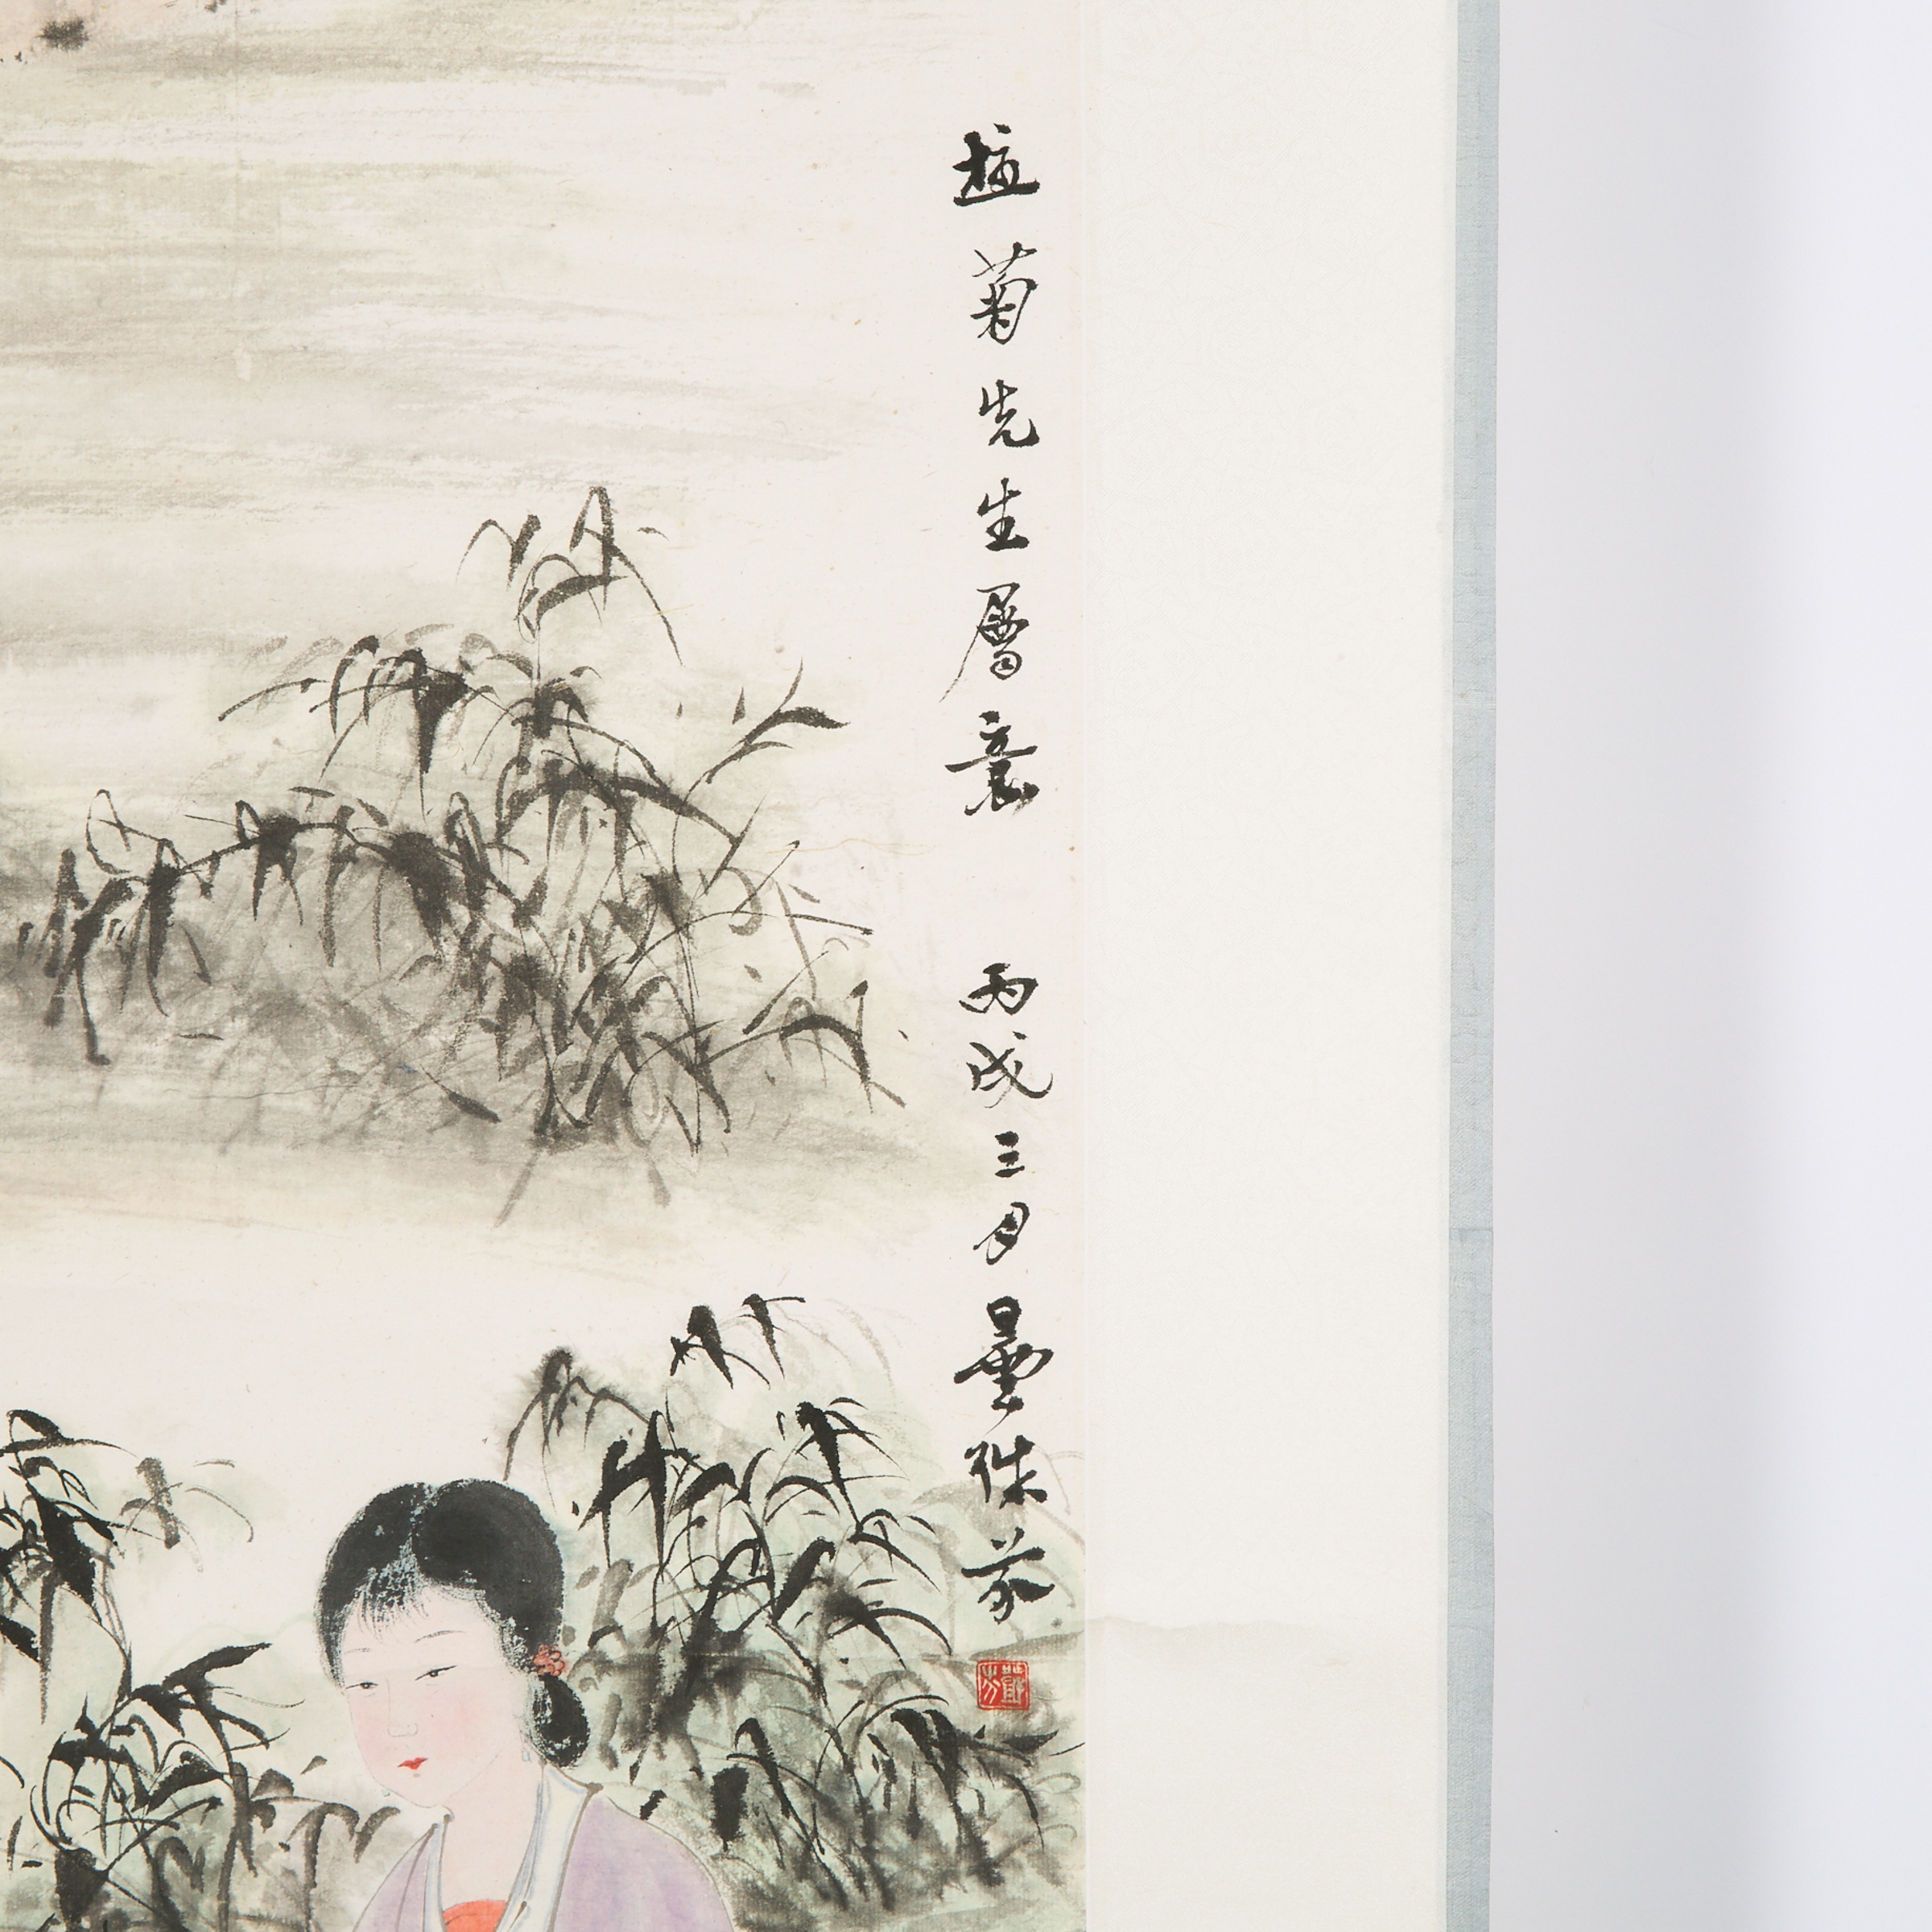 Attributed to Deng Fen (1894-1964), Lady and Bamboo